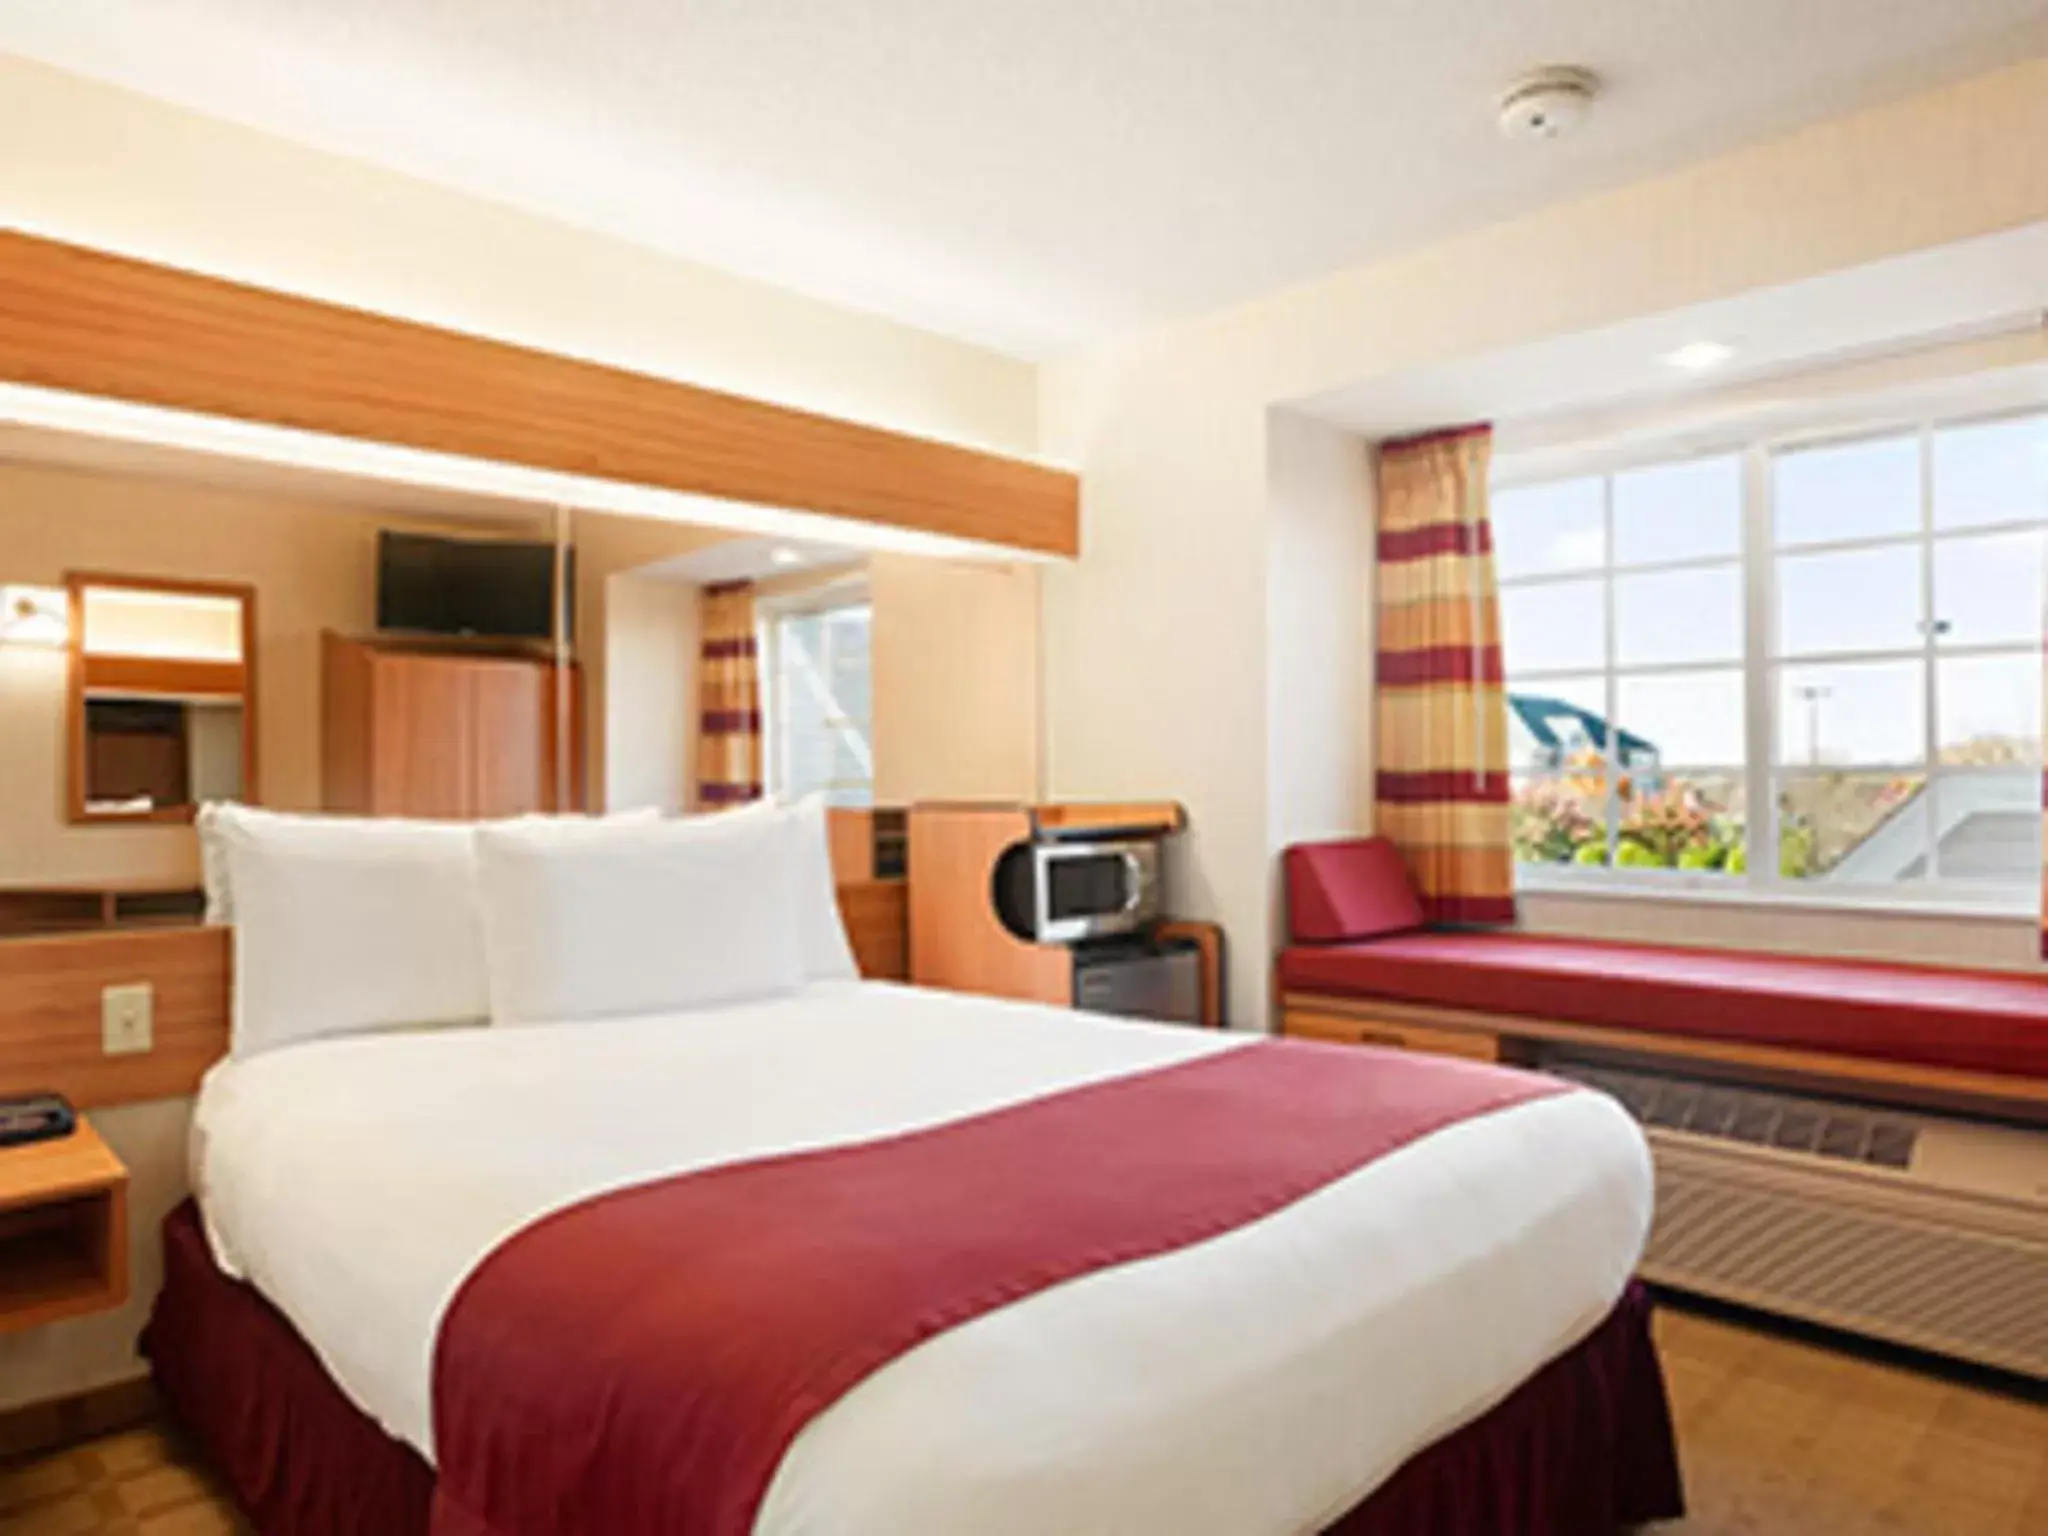 Queen Room - Non-Smoking in Microtel Inn & Suites by Wyndham Ann Arbor